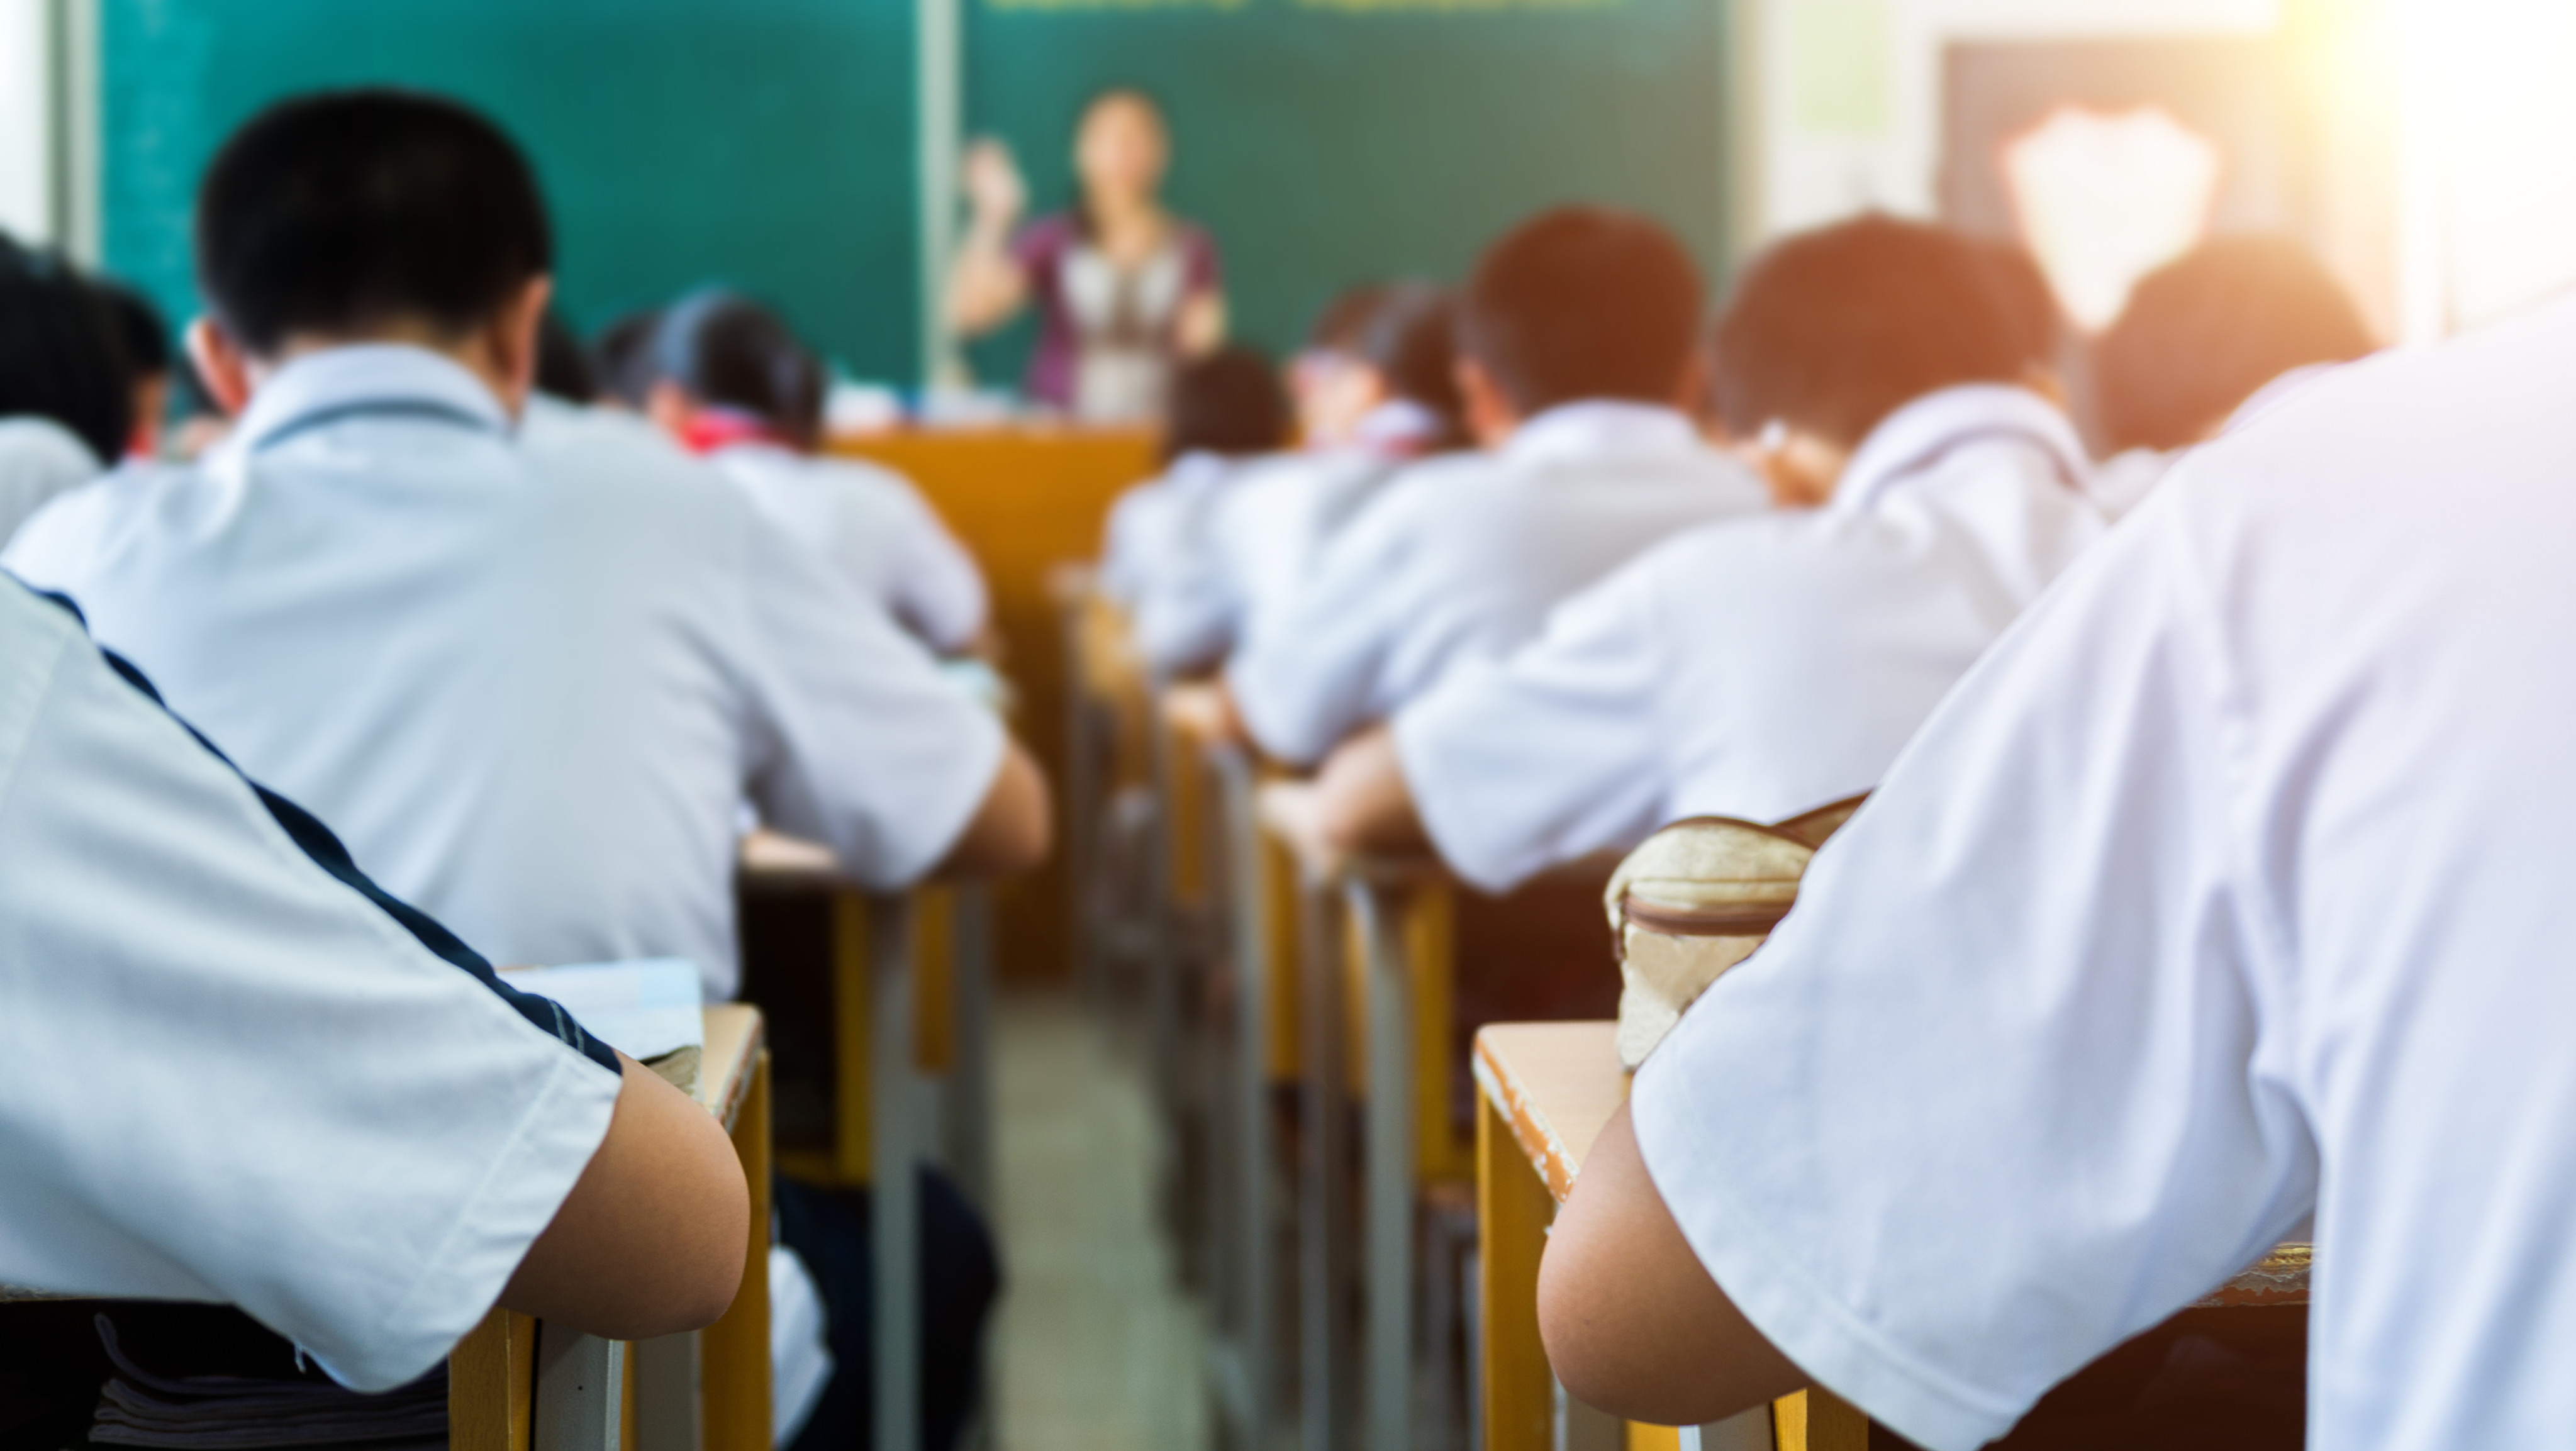 About 800 educators are employed under the official native English-speaking teacher scheme. Photo: Shutterstock